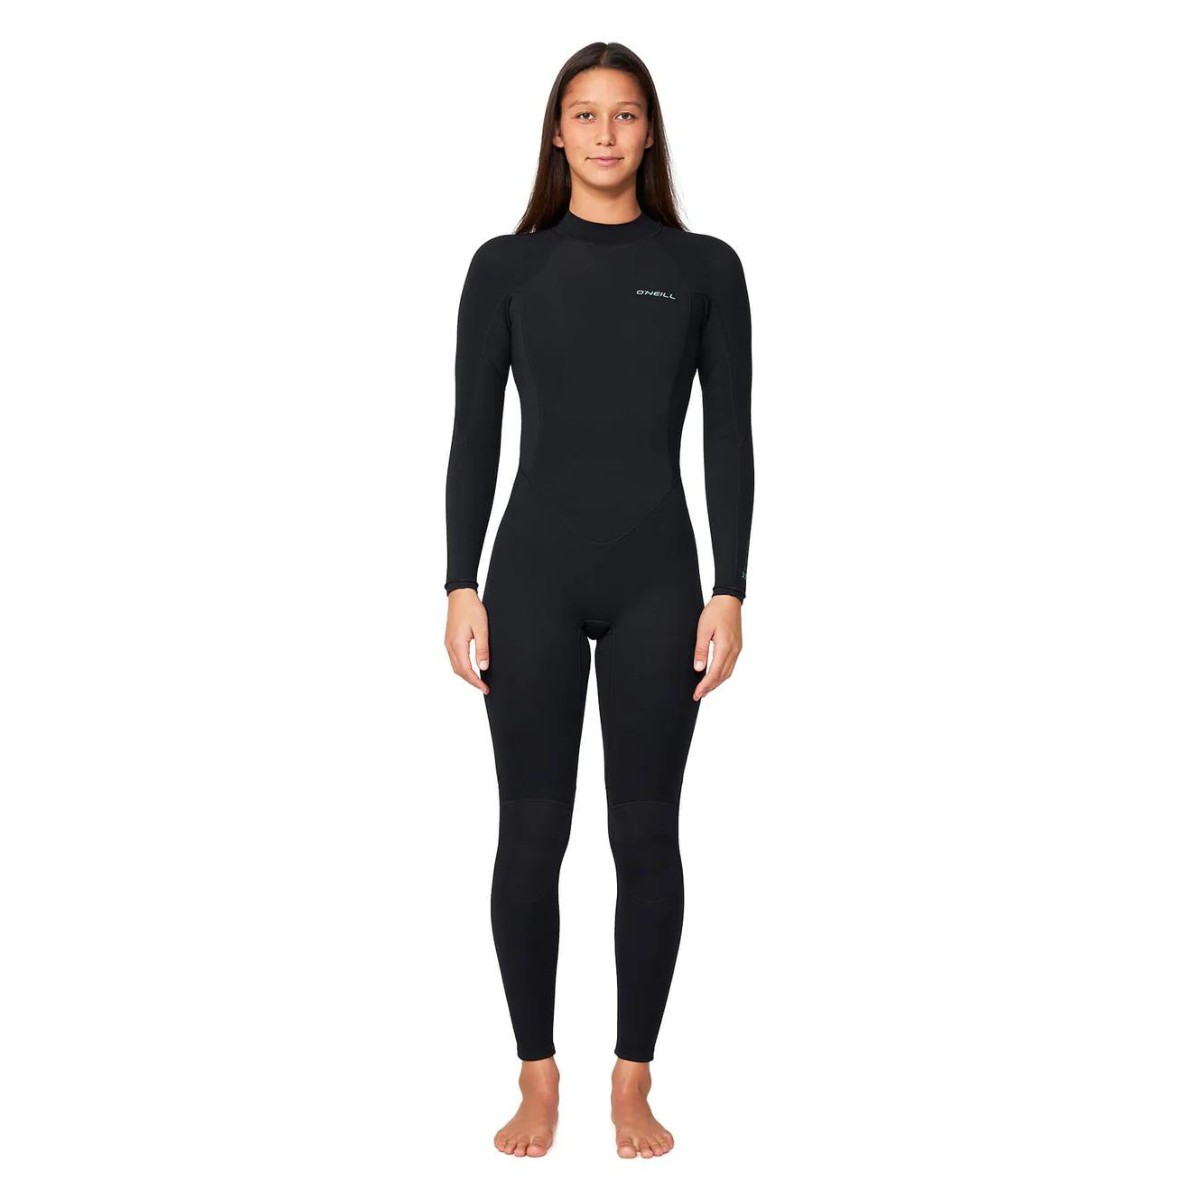 WETSUIT MUJER - WMNS REACTOR 2 BZ FULL 3/2MM - A05 BLK/BLK/BLK